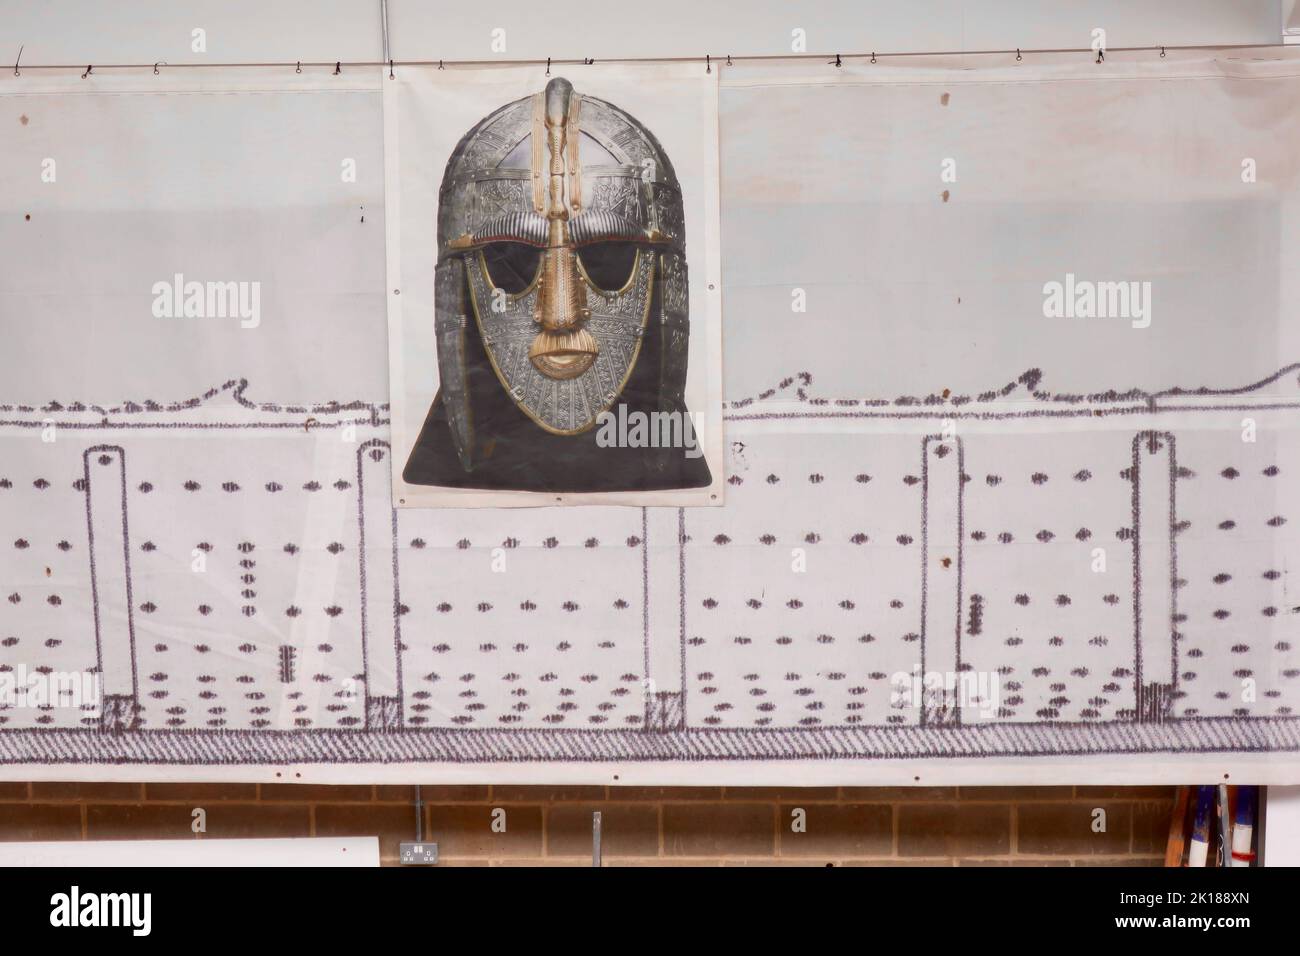 Woodbridge, Suffolk, UK - 16 September 2022 ; The Longshed boat building project at Whisstocks Square. Picture of the Sutton Hoo Anglo Saxon helmet on the wall. Stock Photo